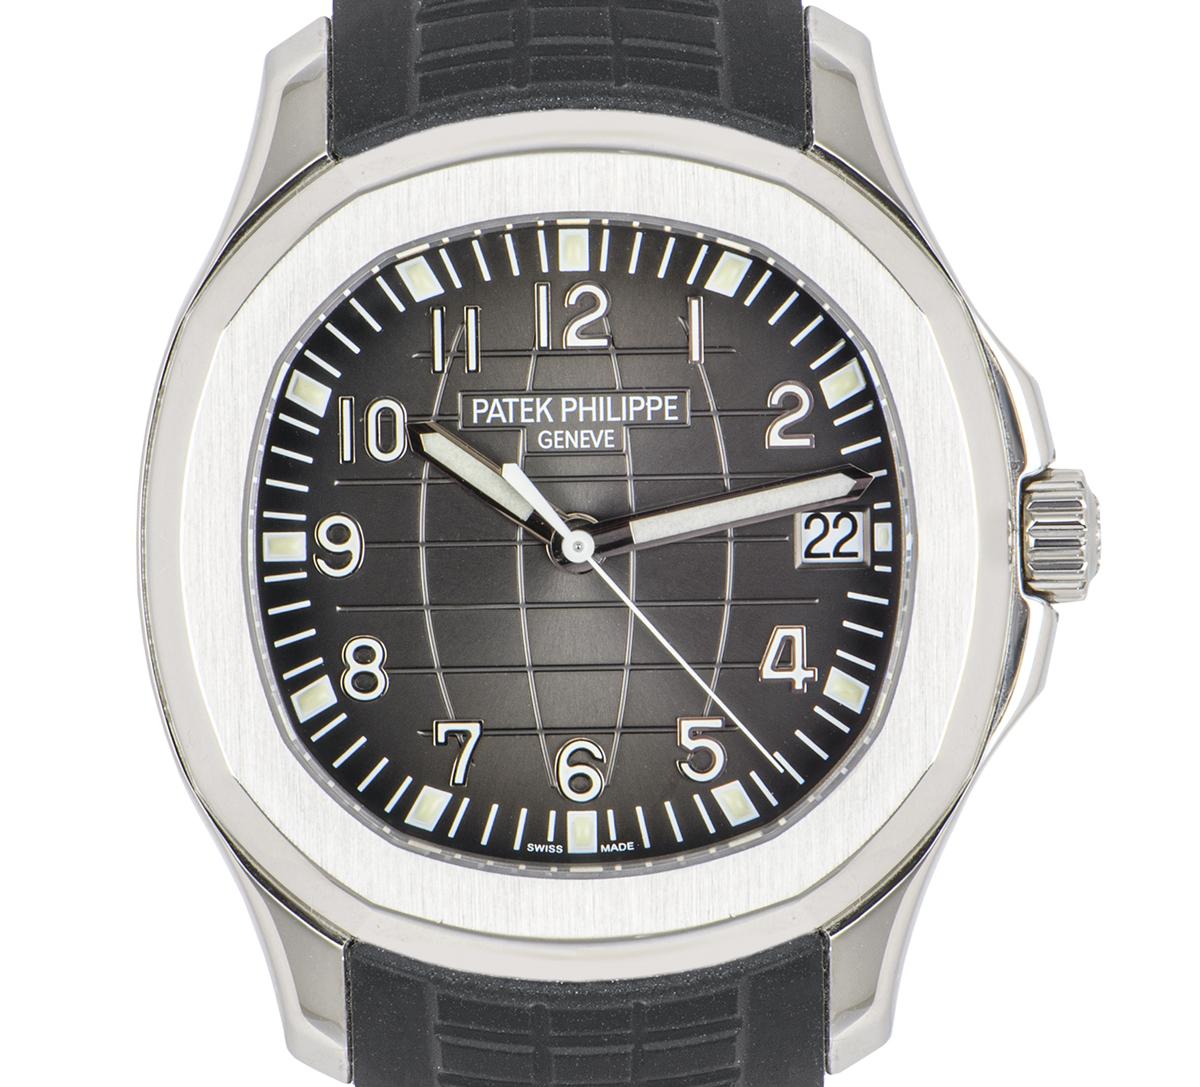 Patek Philippe Aquanaut Stainless Steel 5167A-001 3